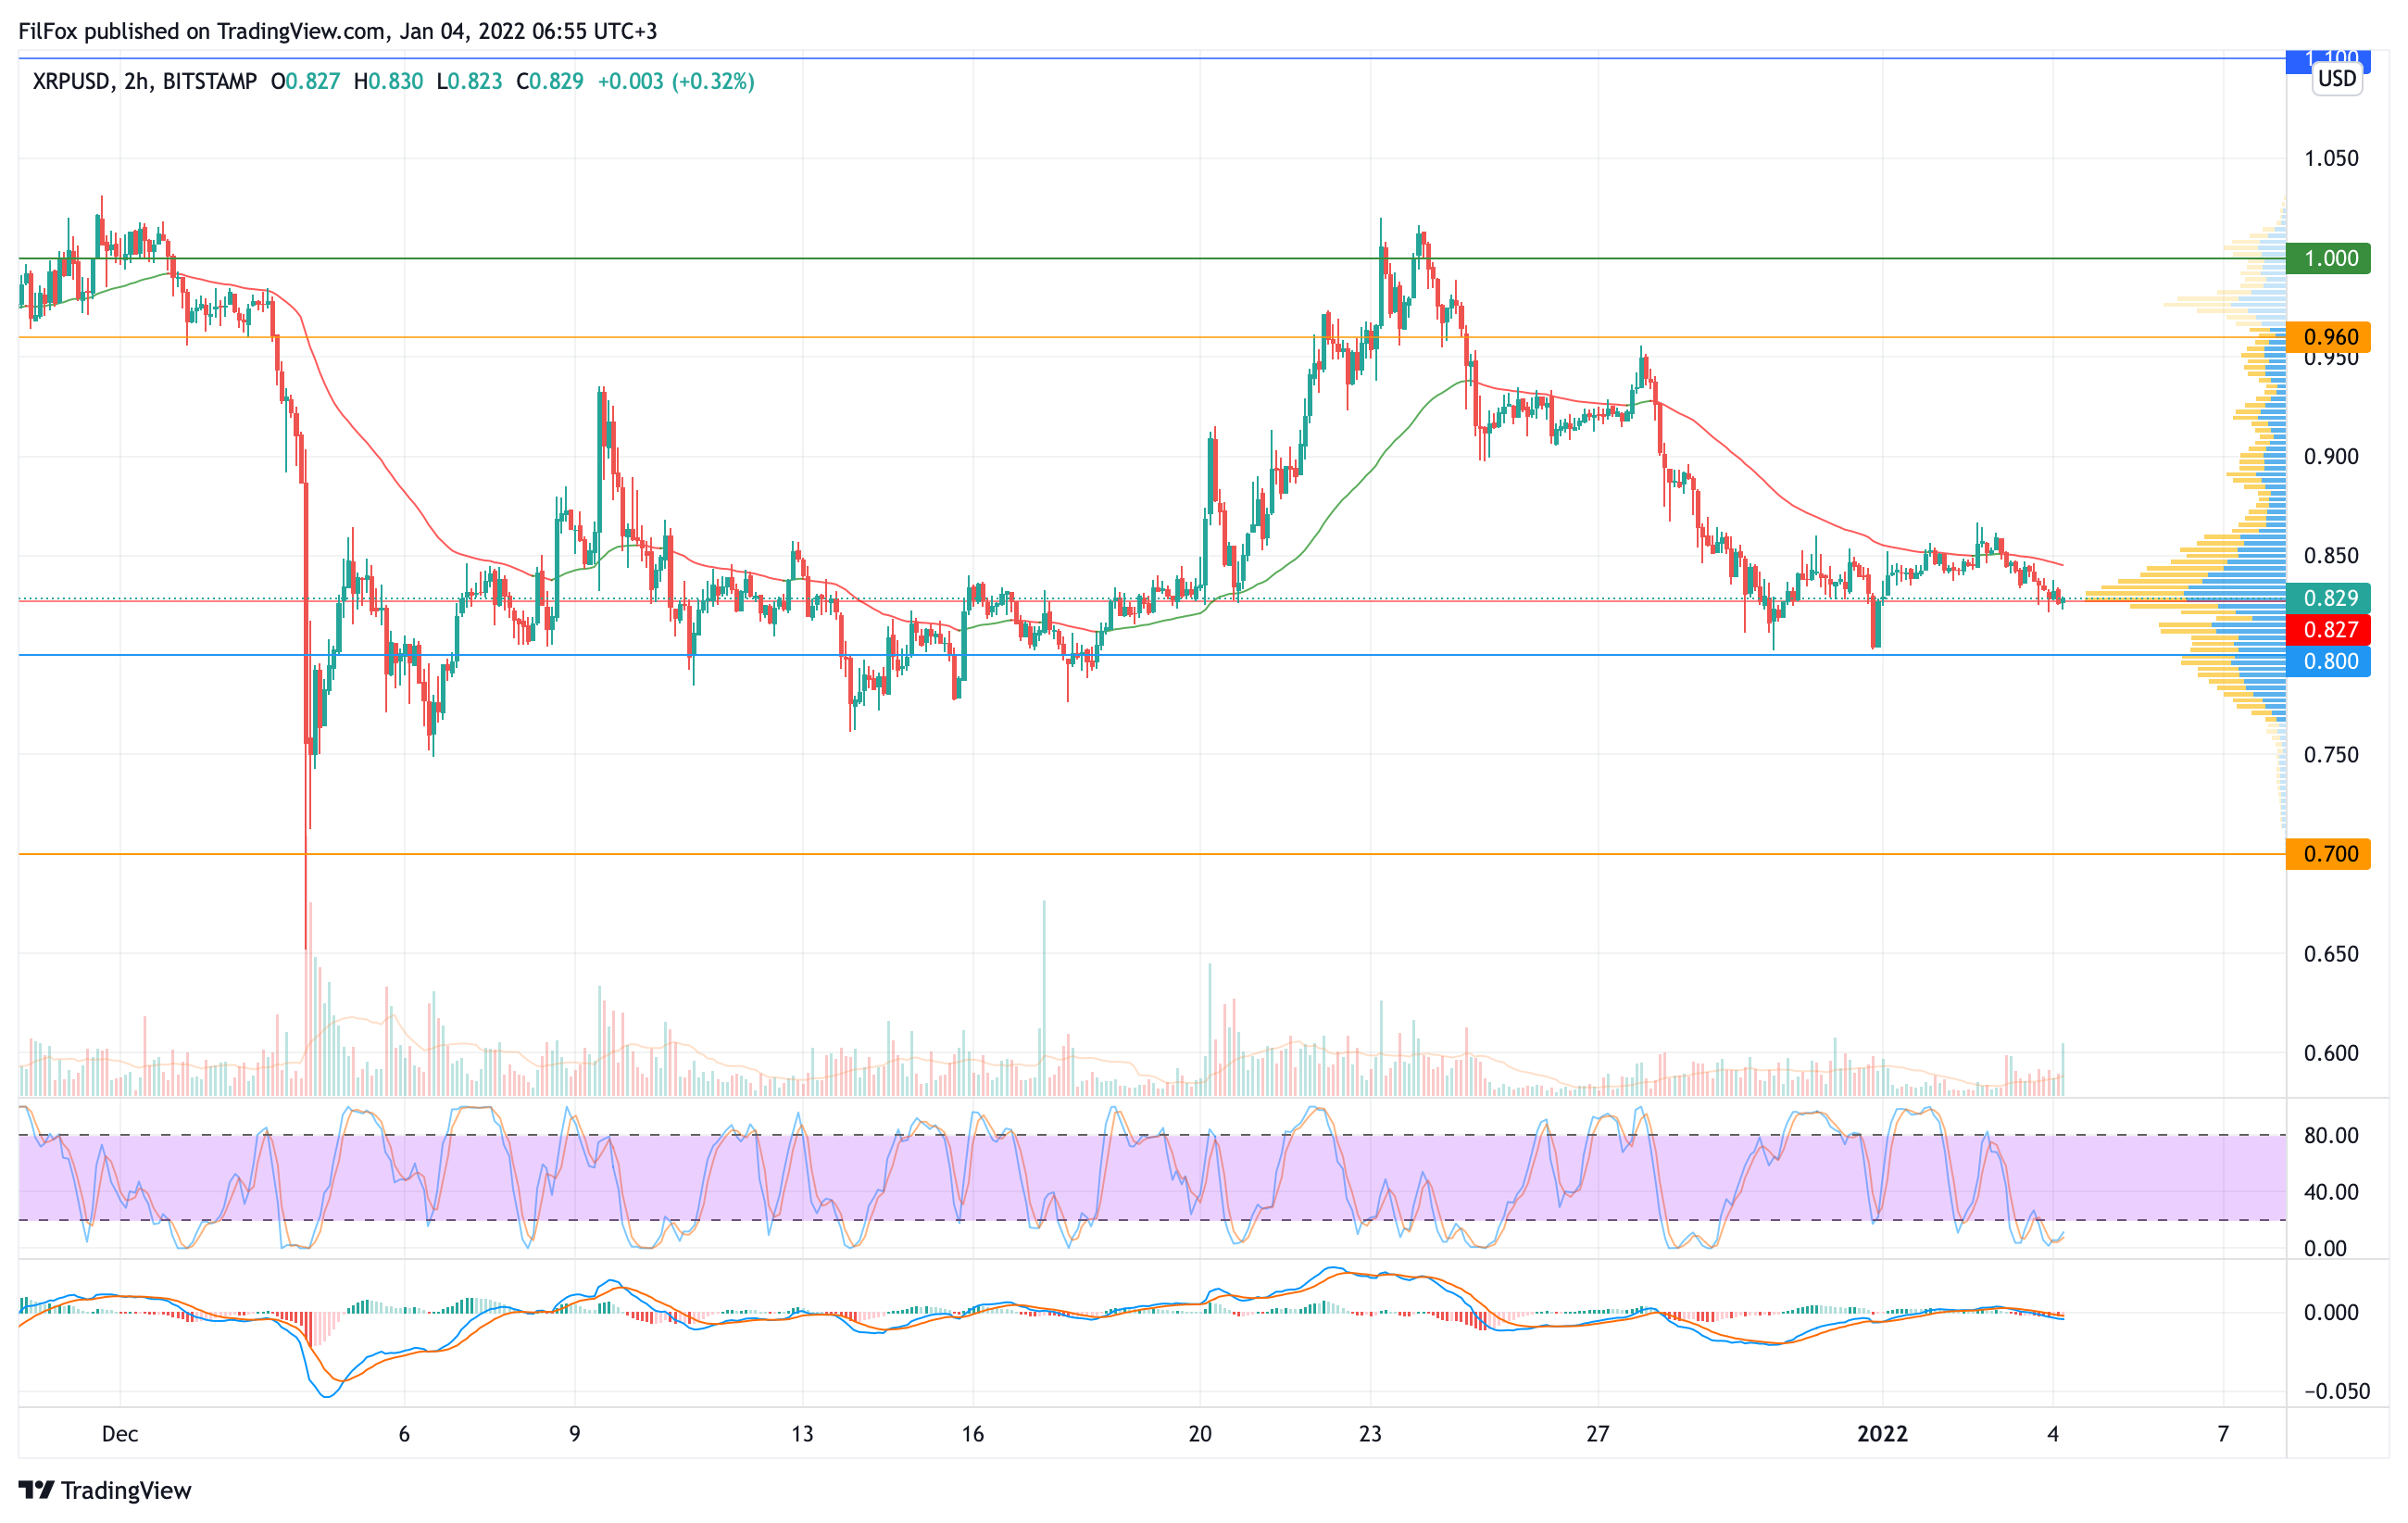 Analysis of the prices of Bitcoin, Ethereum, XRP for 01/04/2022